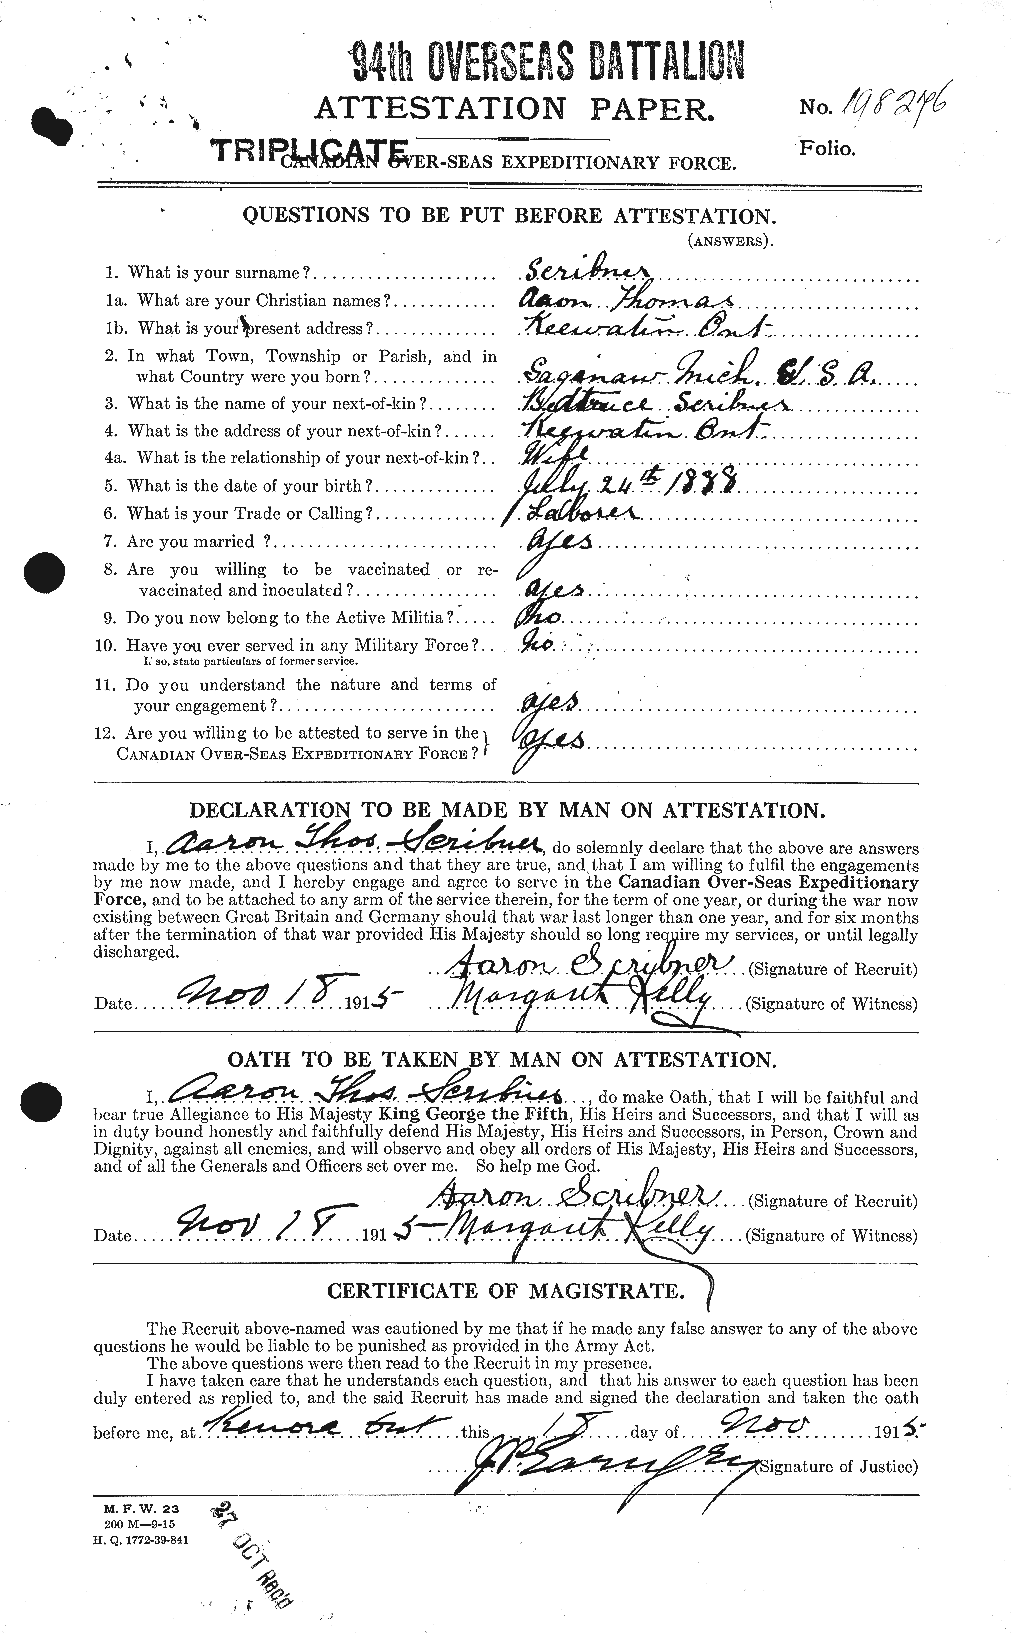 Personnel Records of the First World War - CEF 086963a